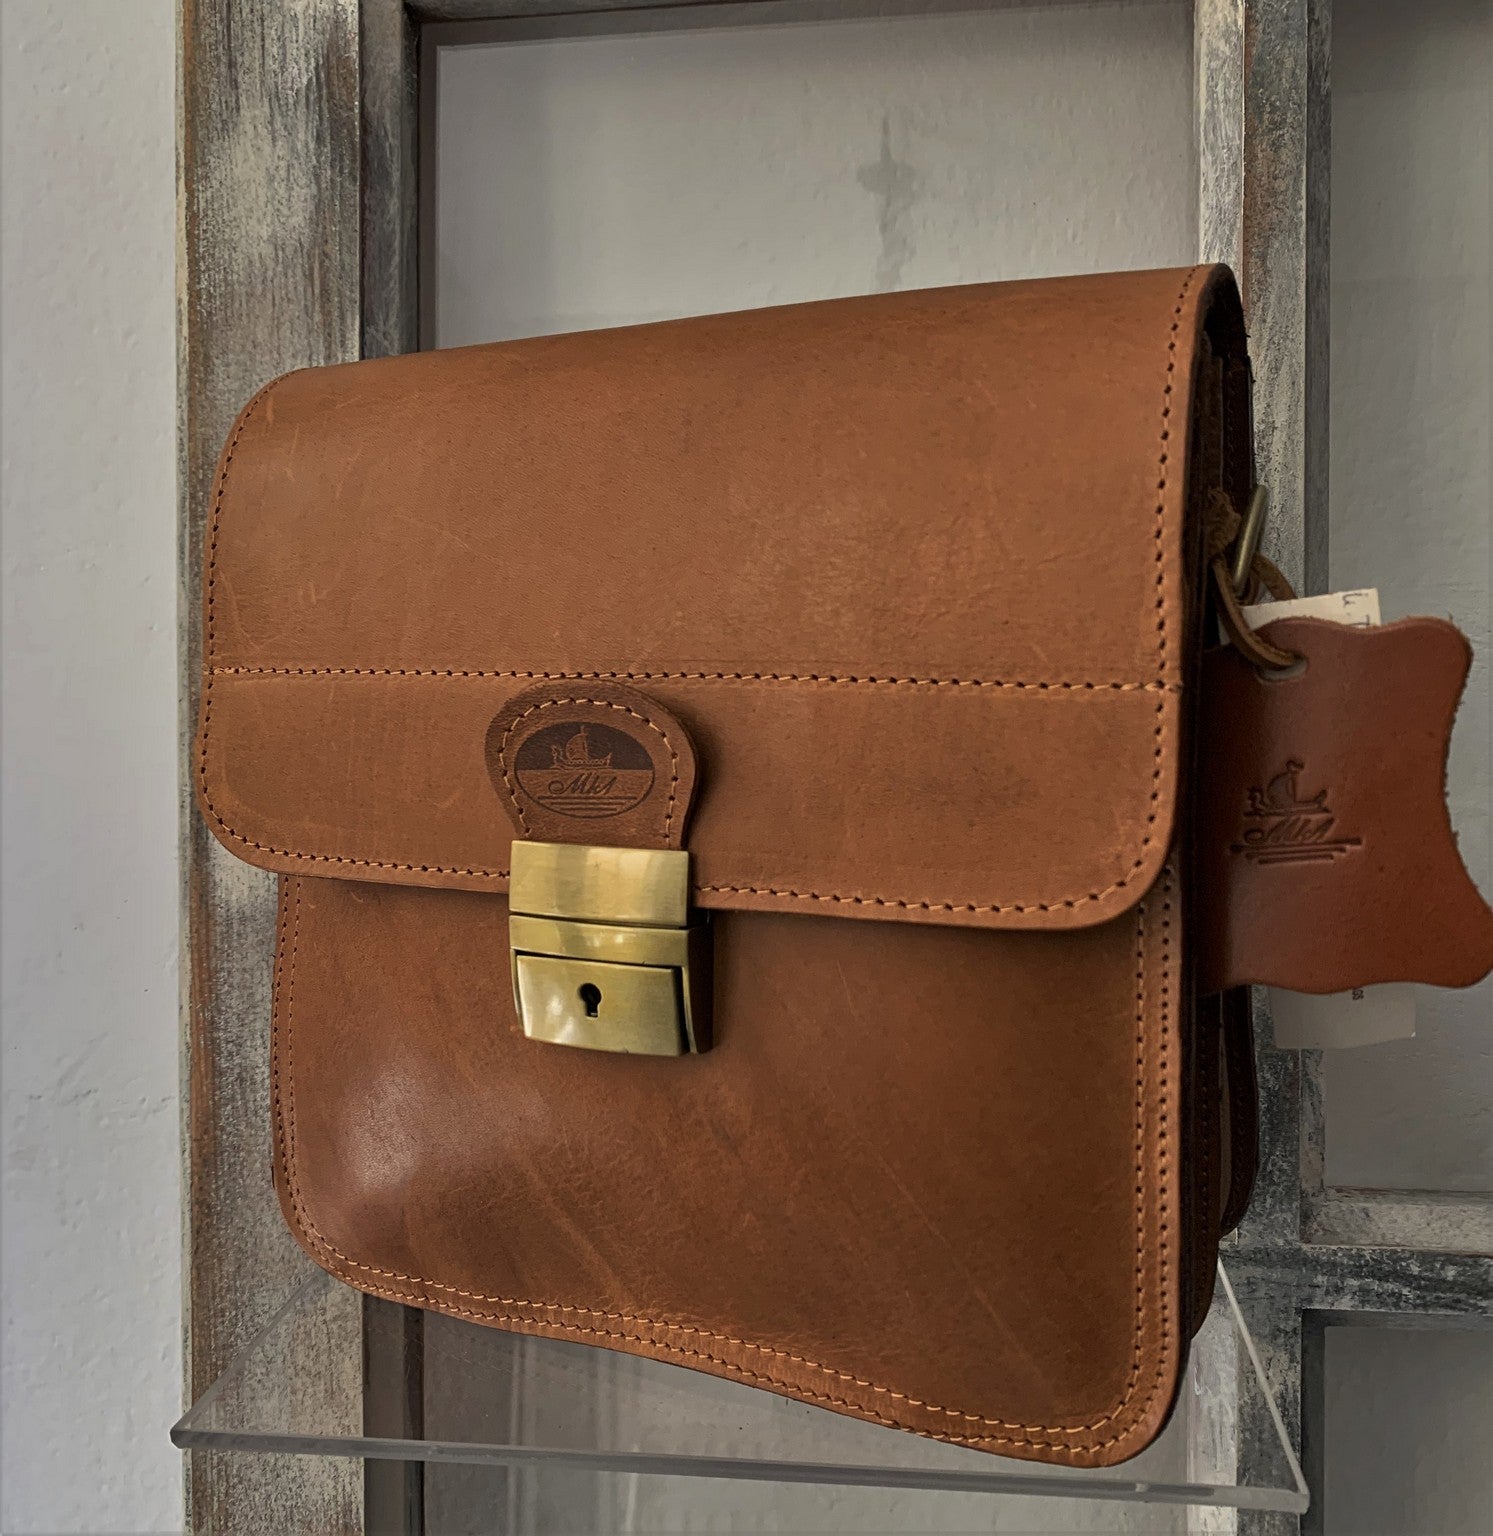 "Ikaros" - midsize crossbody bag handcrafted from natural light brown leather with square lock WT/52T